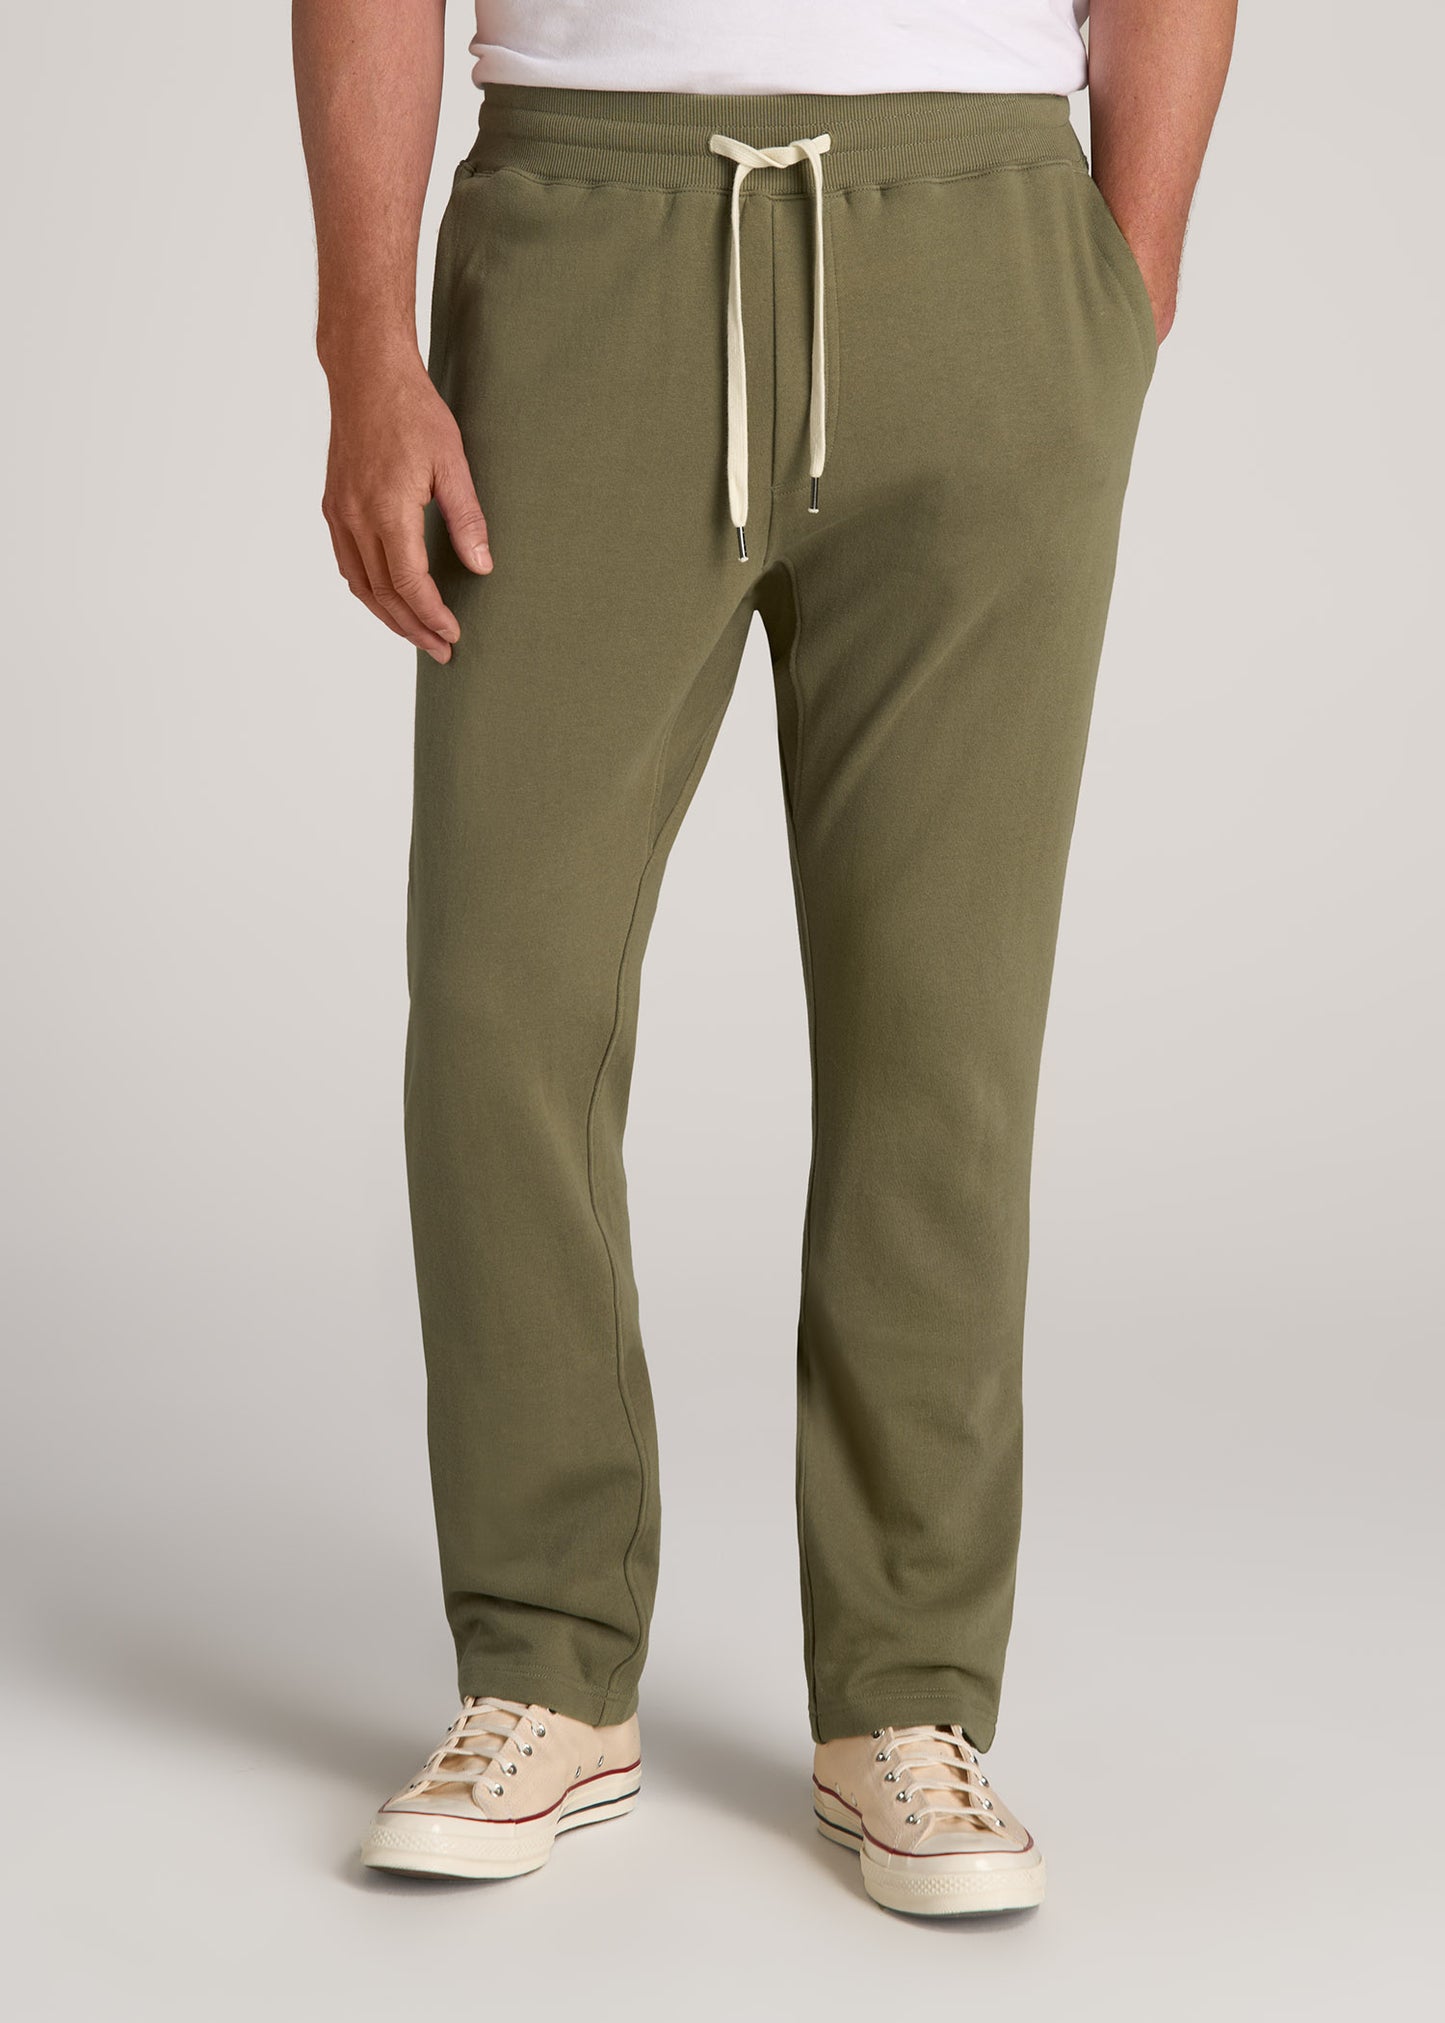 LJ&S Brushed Terrycloth Sweatpants for Tall Men in Vintage Moss Green